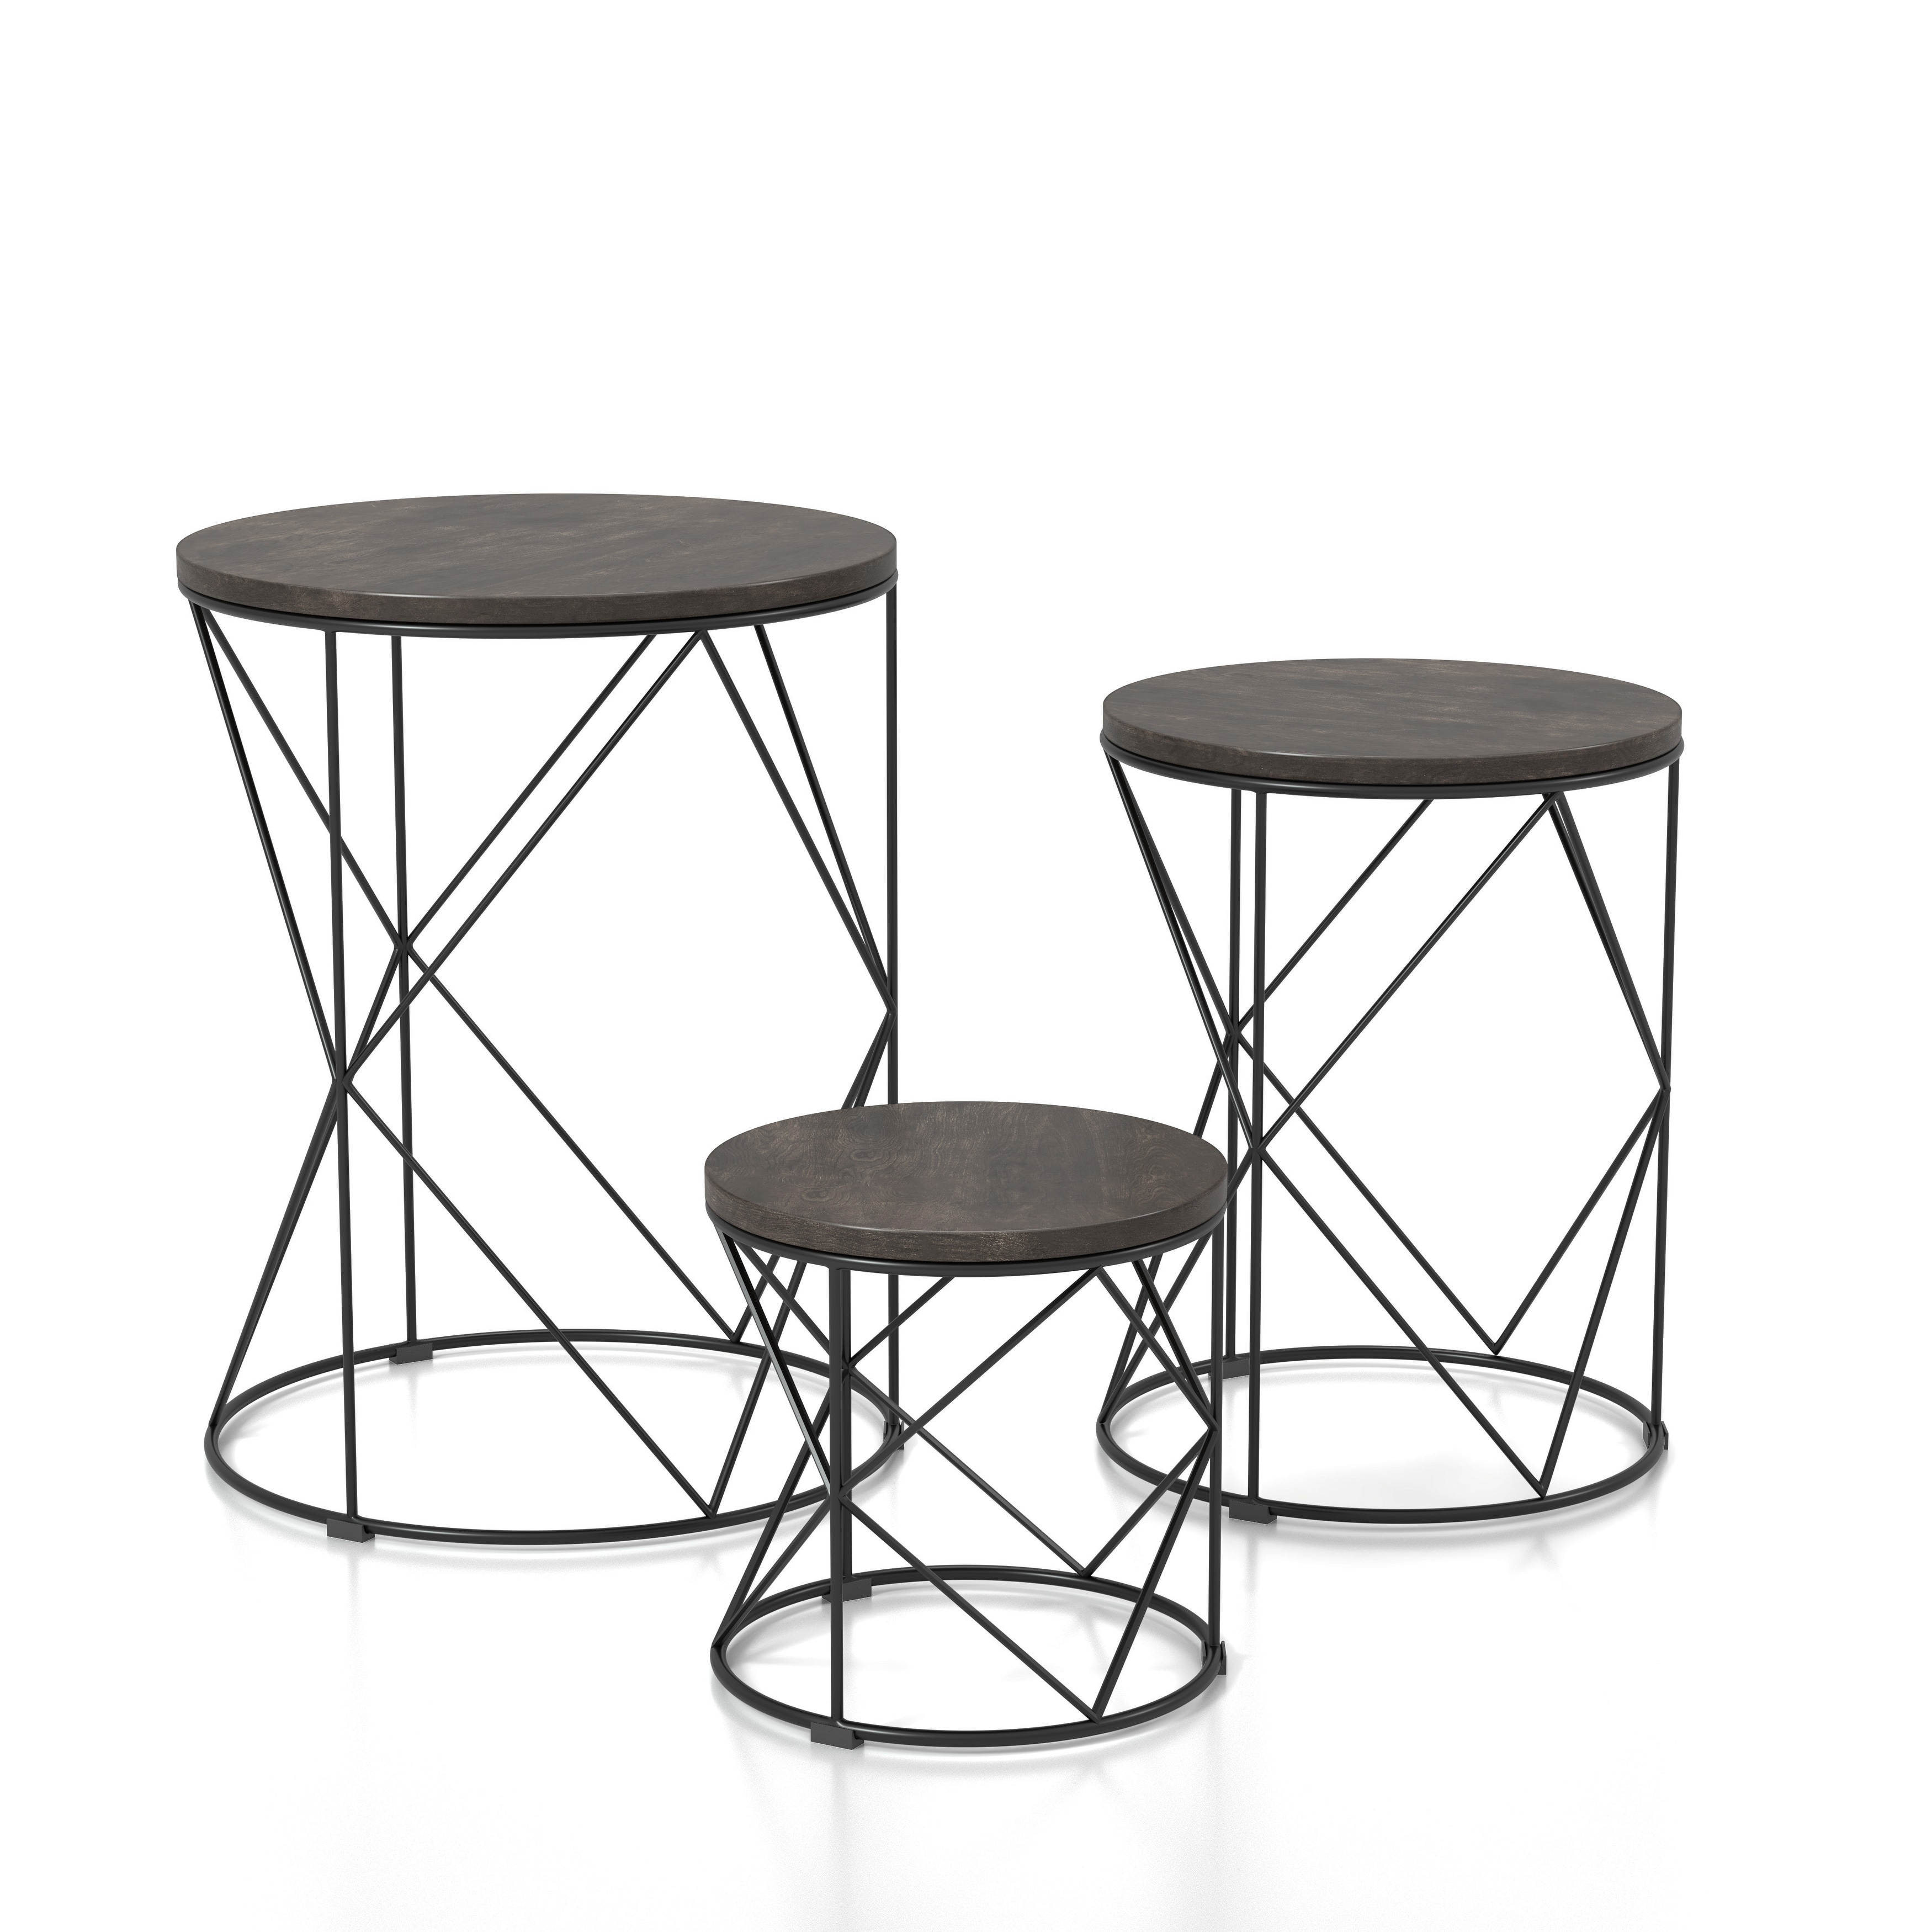 Furniture of America Rusk Modern 17-inch Metal 3-Piece Nesting Tables Set